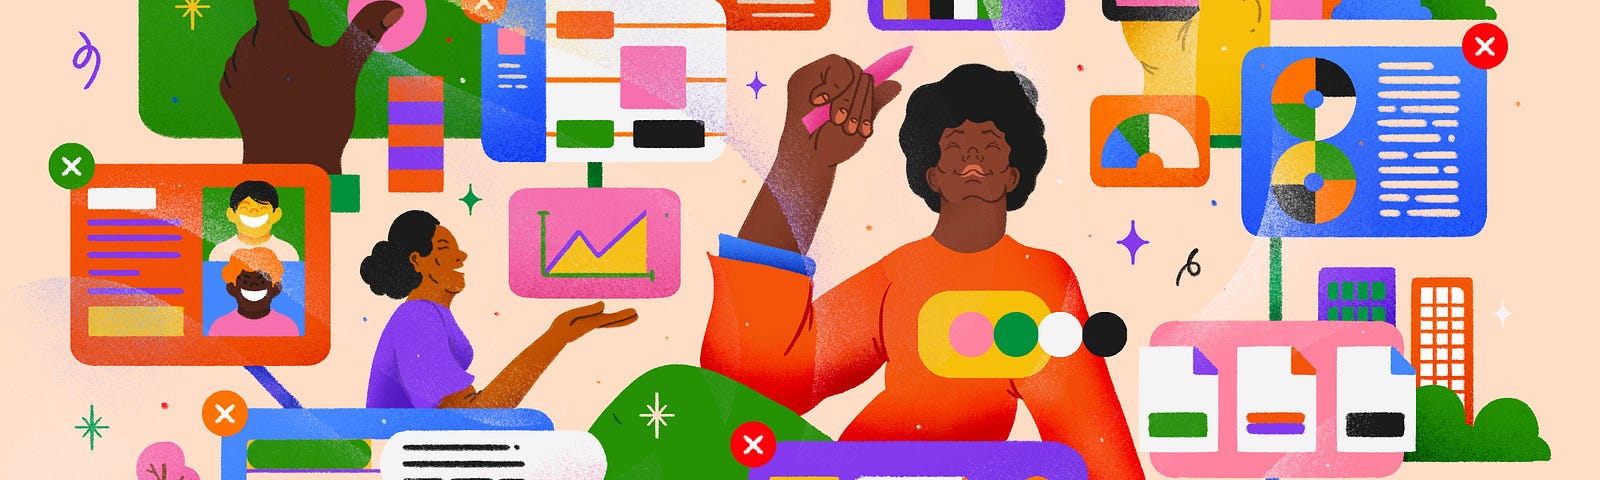 A very colorful digital illustration with a Black woman holding a pencil at the center. She’s surrounded by more than a dozen documents and electronic devices with different graphics on them.